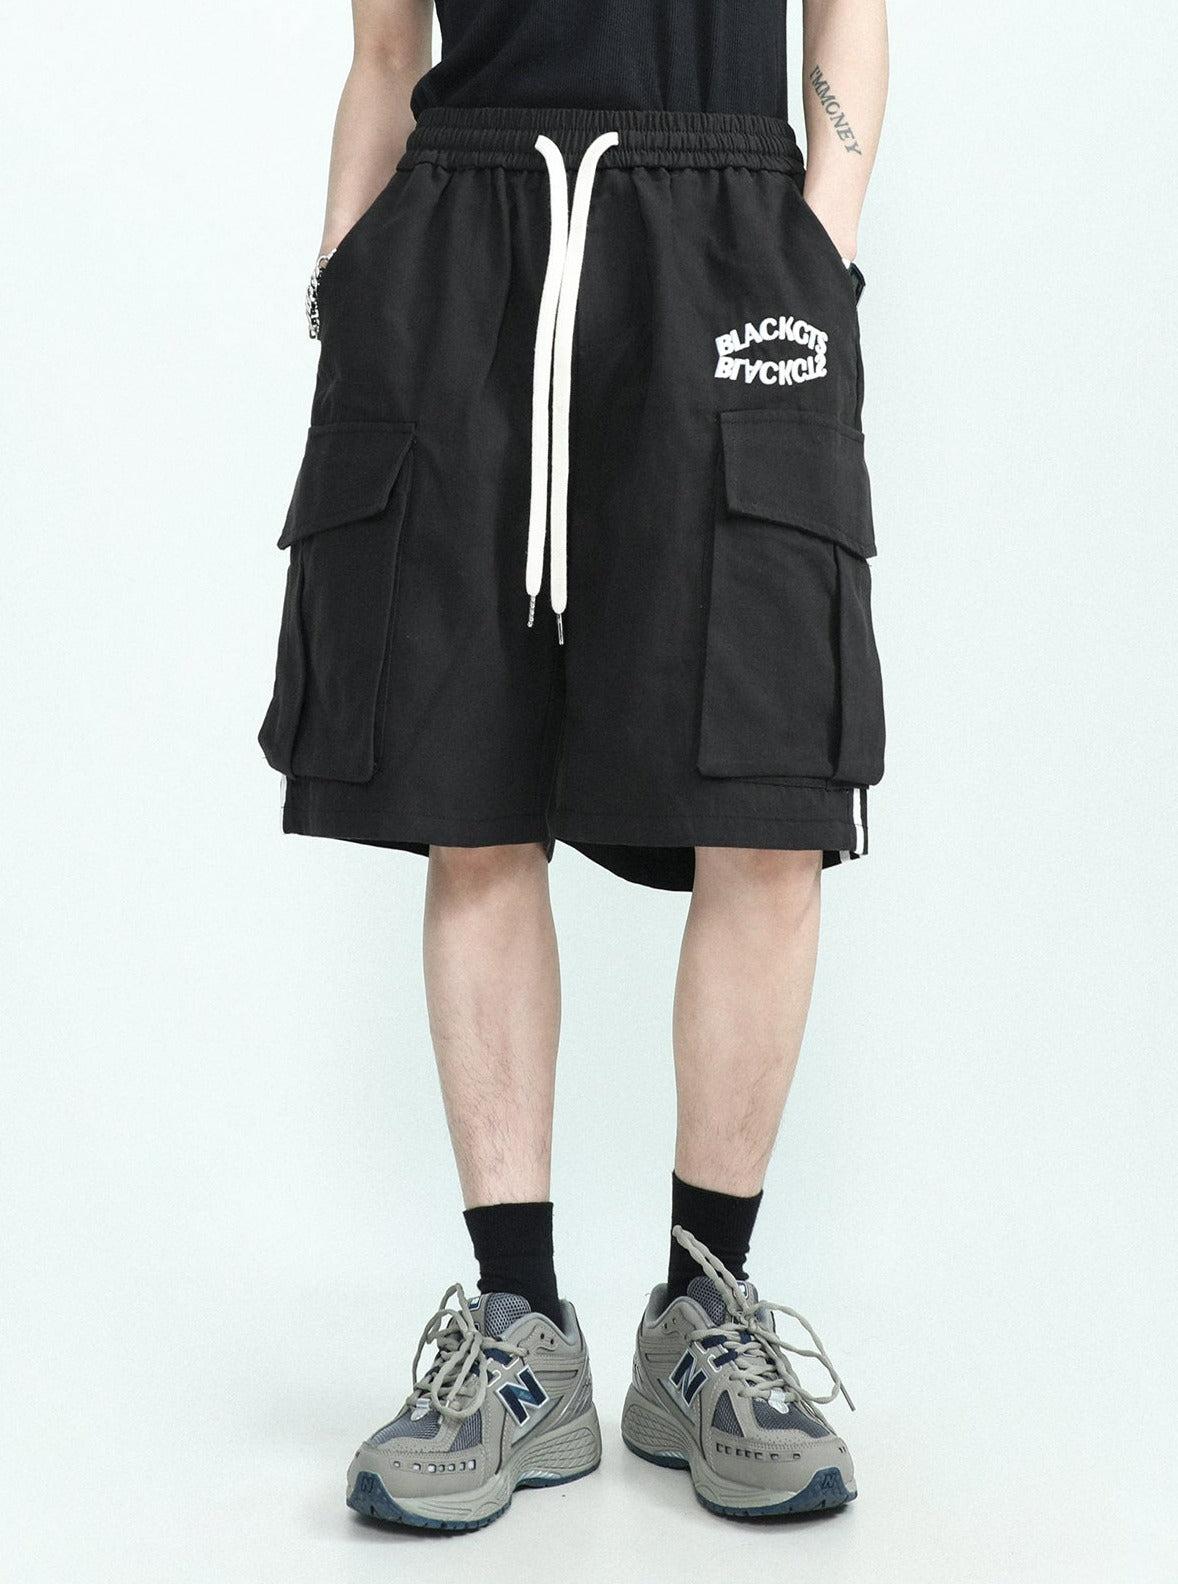 Side Striped Cargo Shorts Korean Street Fashion Shorts By Mr Nearly Shop Online at OH Vault